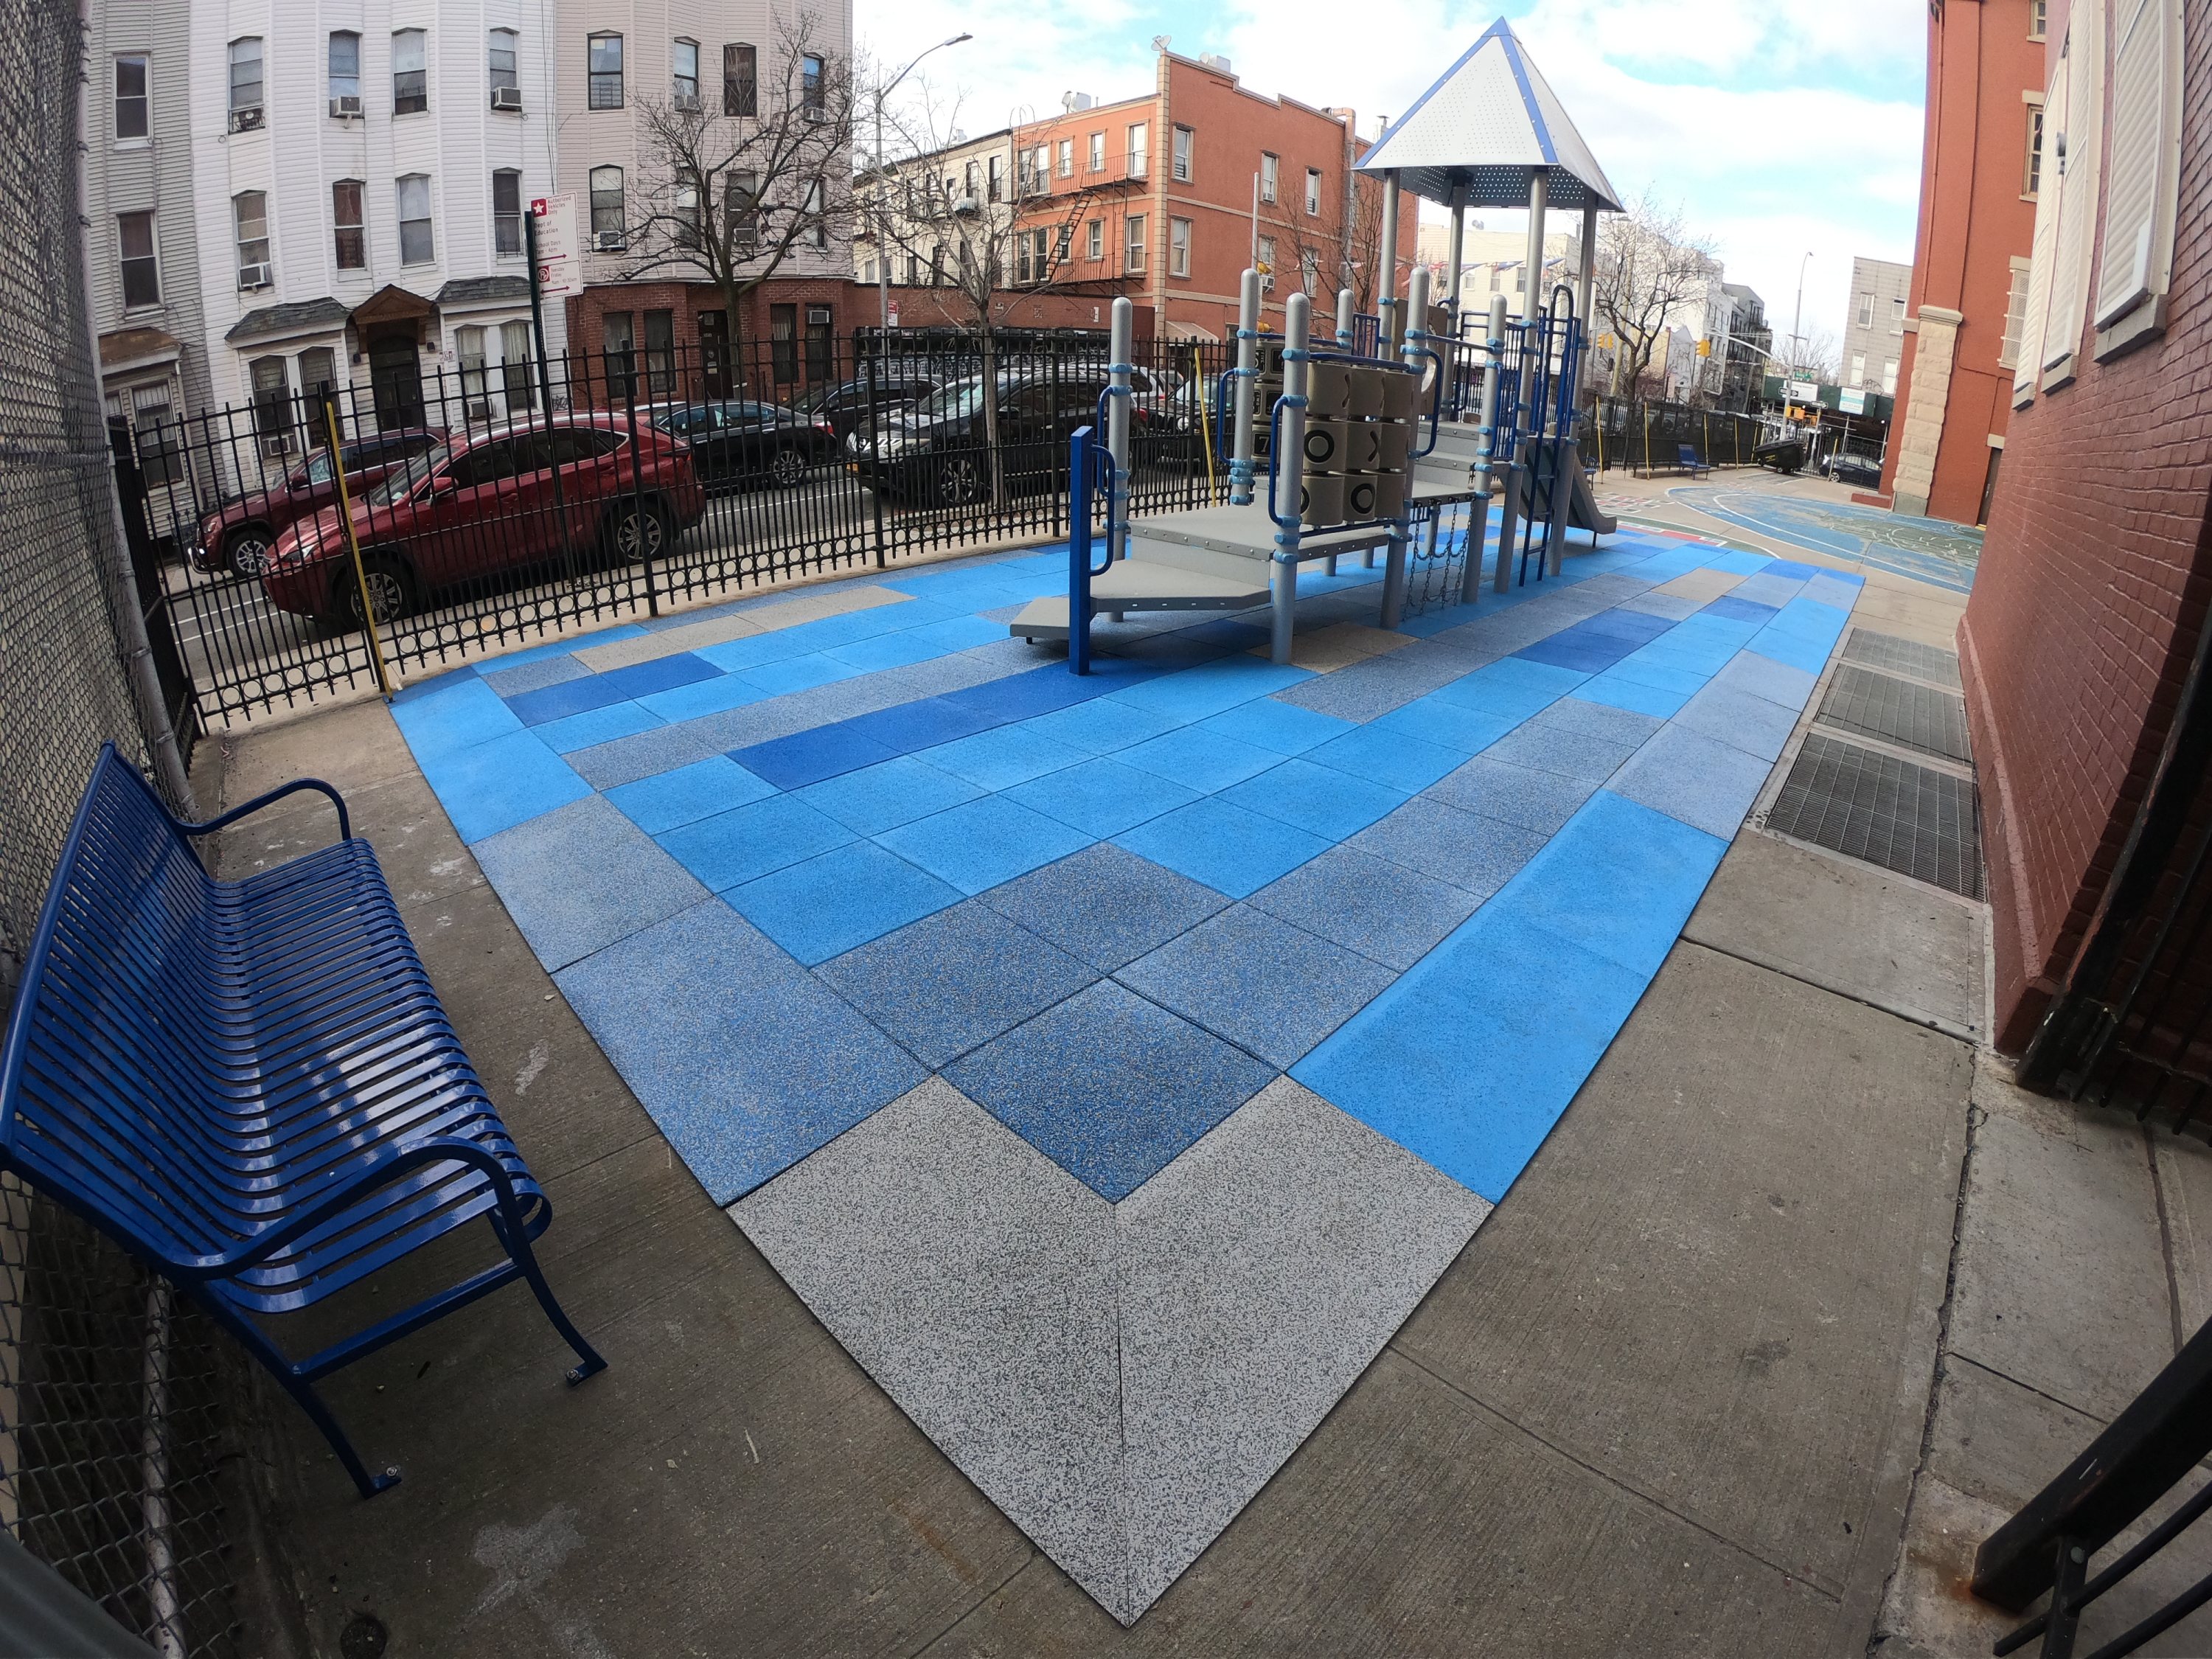 ADA Compliant Transitional Ramps For School Playgrounds